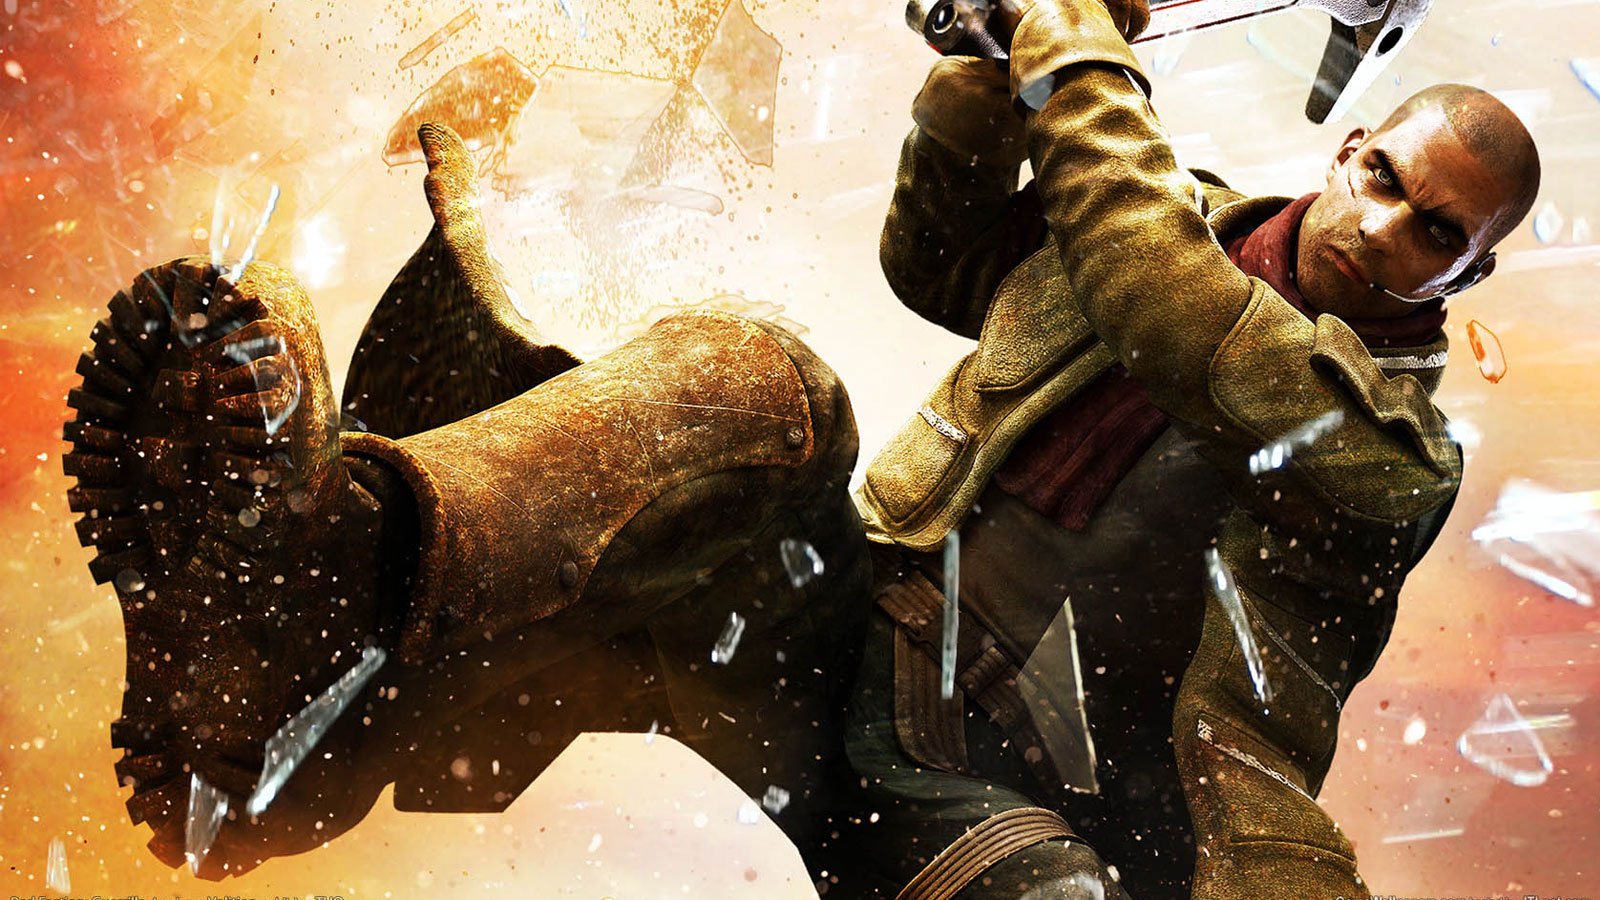 Red Faction: Guerrilla Remastered